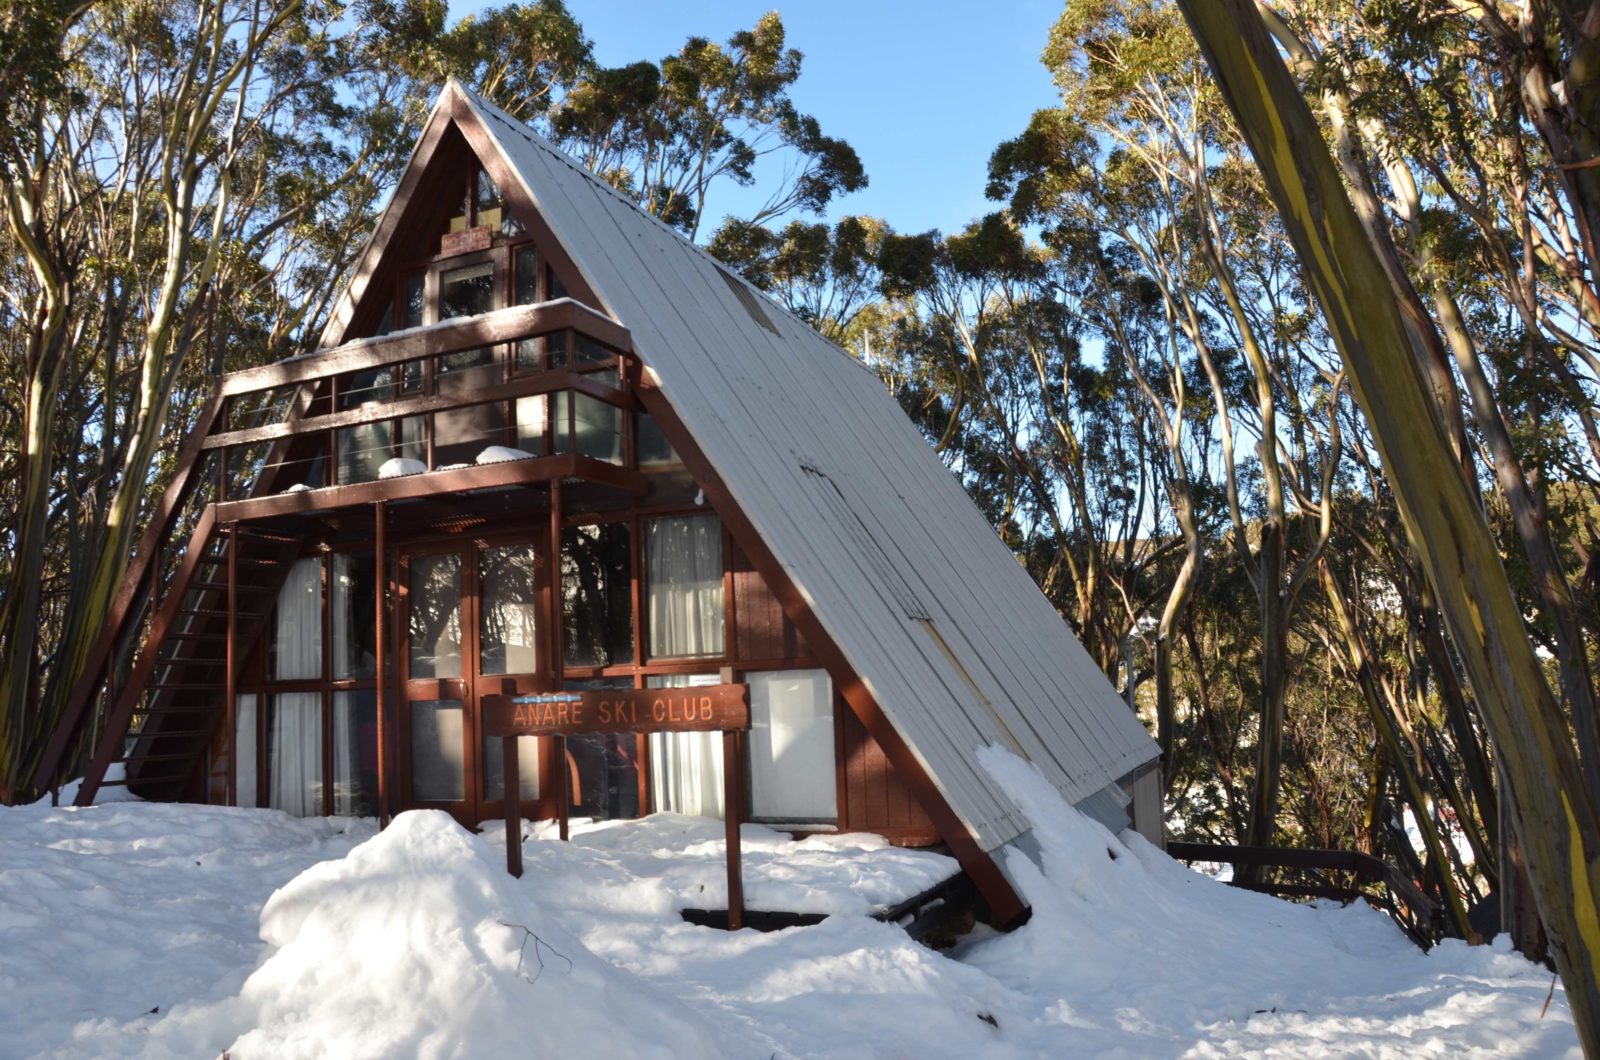 ANARE A frame lodge set in t5he snow amongst snow gum trees. Ski to ski run and XC trails.